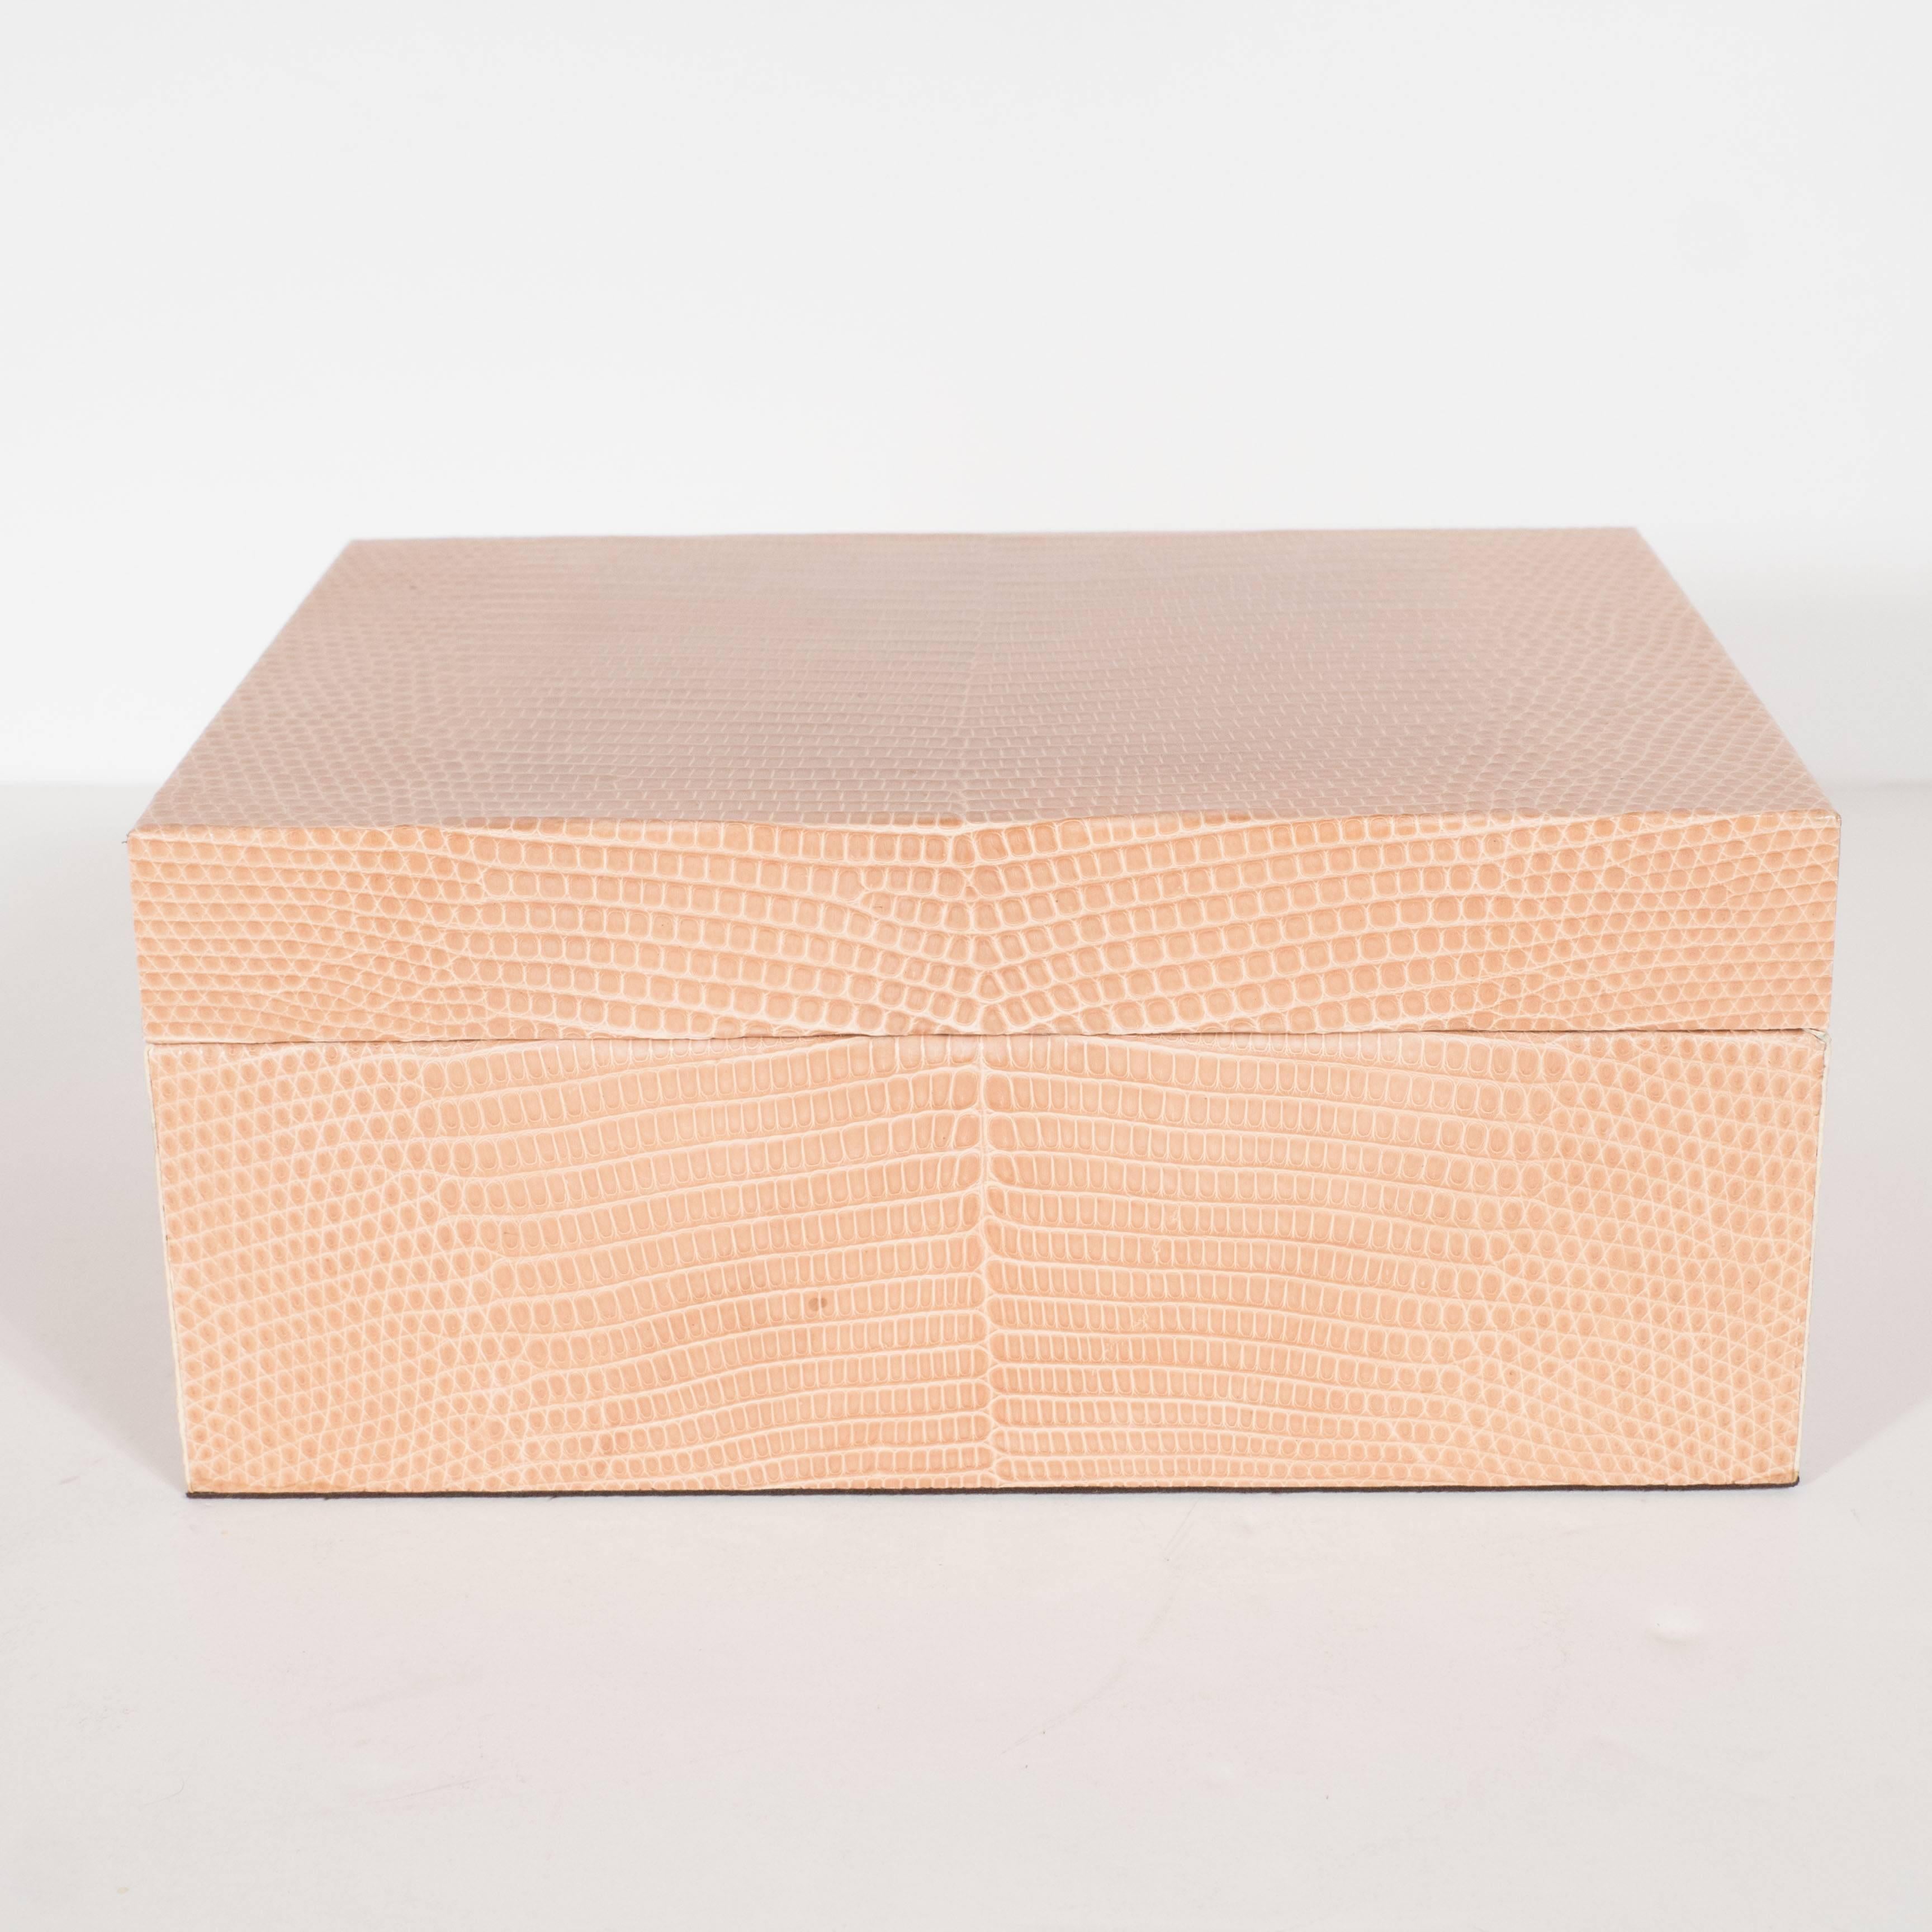 Philippine Chic Modernist Lizard Skin Wrapped Box in Natural Tones For Sale